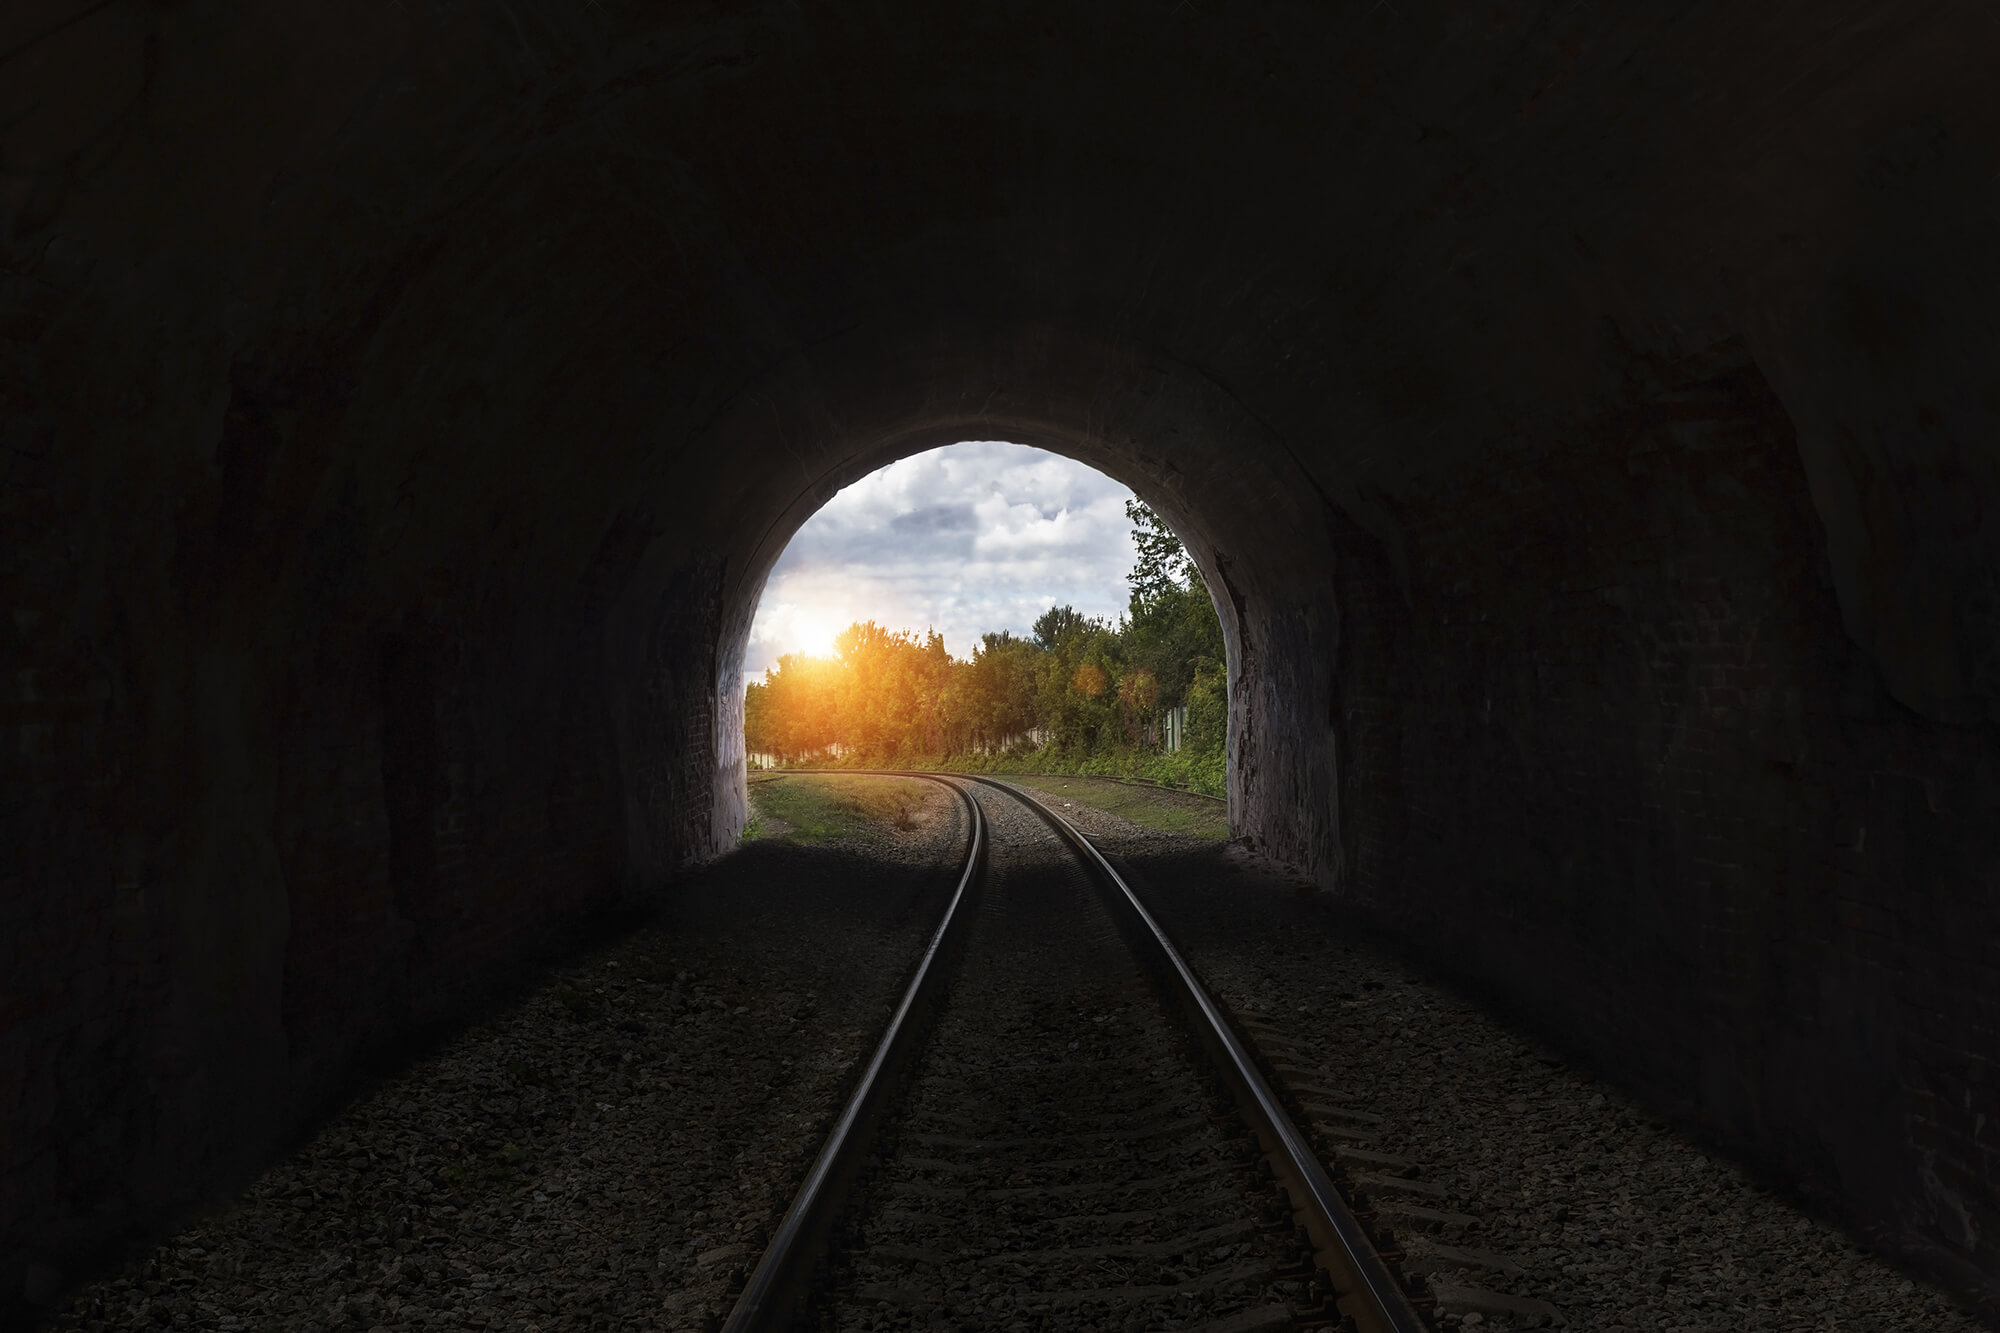 Innovating in Uncertain Times - Light at the end of the tunnel image